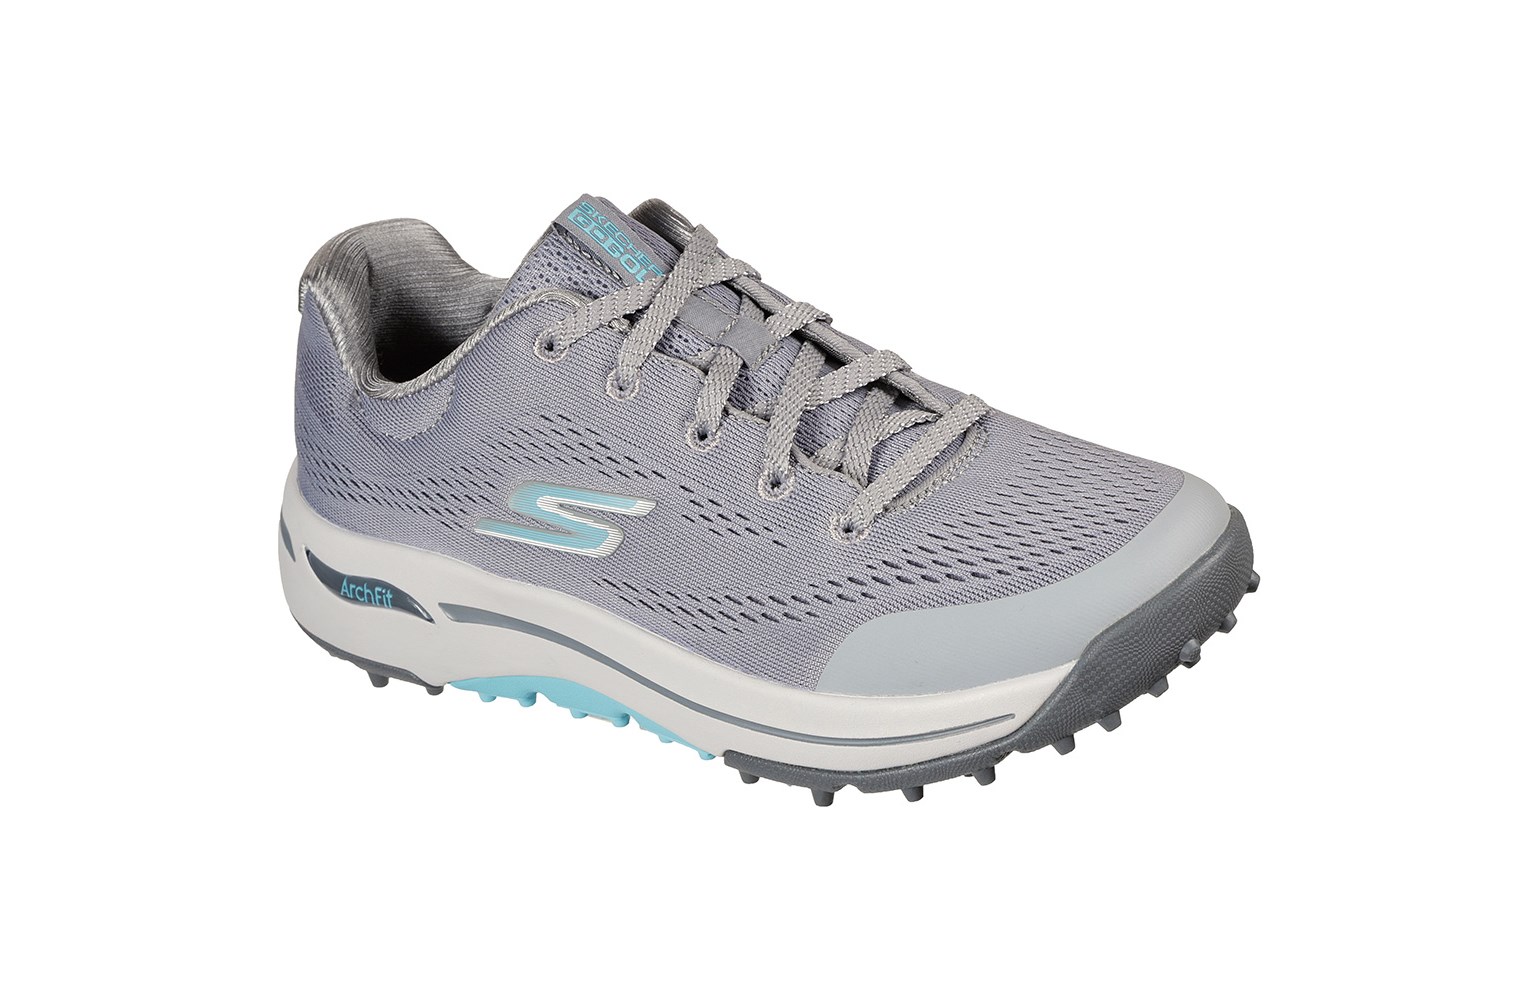 arch support skechers arch fit golf shoes